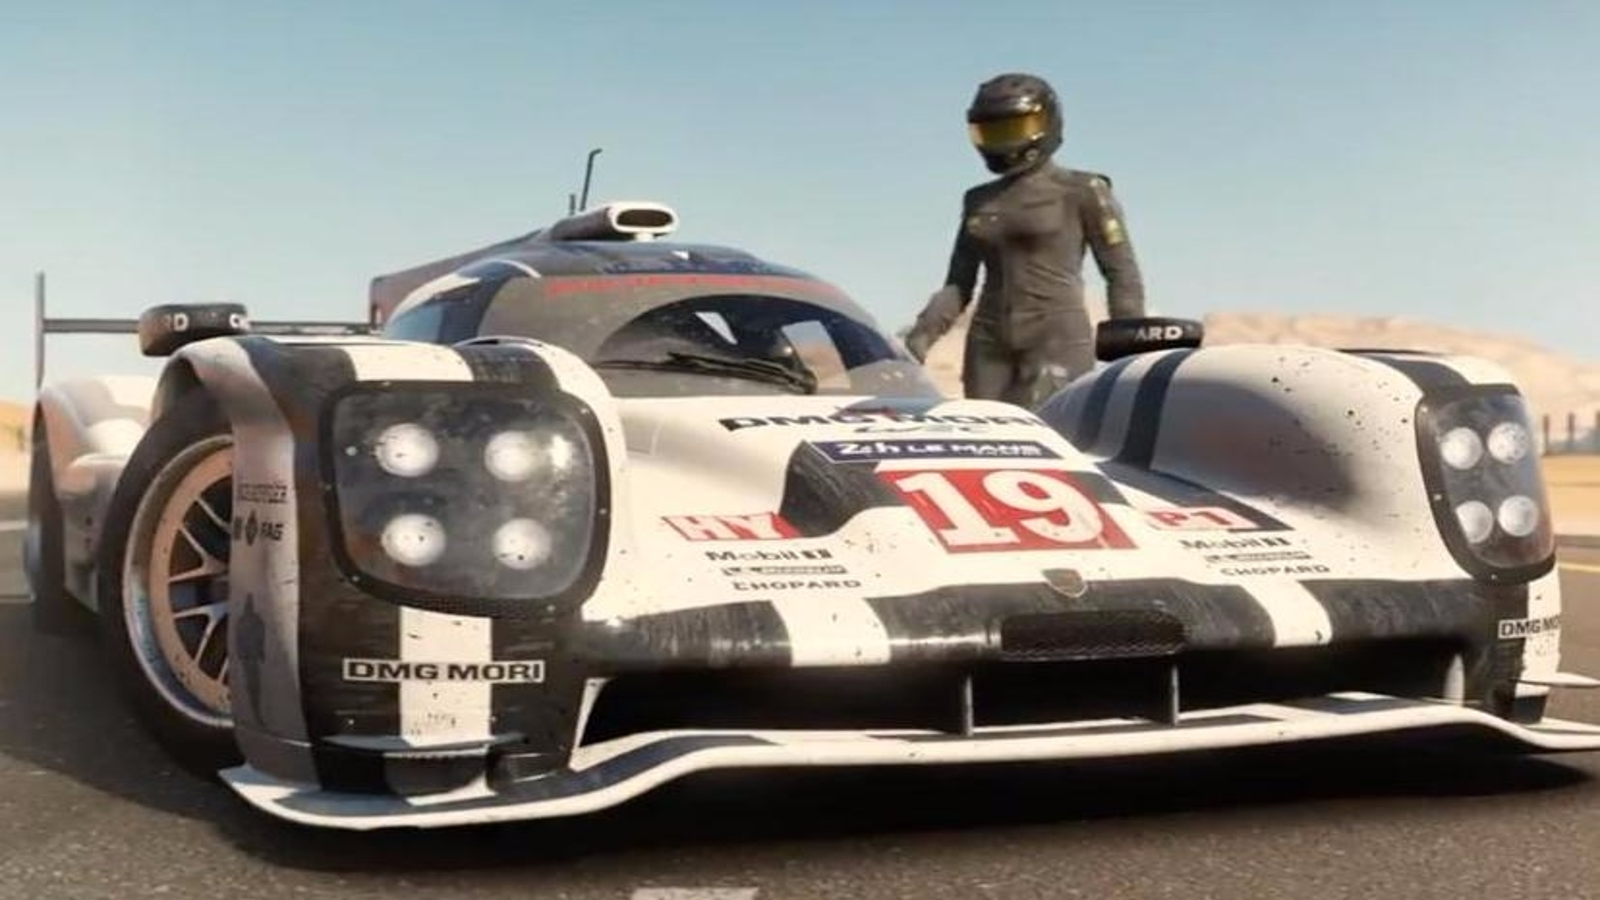 Forza Motorsport 7 Demo Review - What We Learned Playing the New Forza  Motorsport 7 Demo